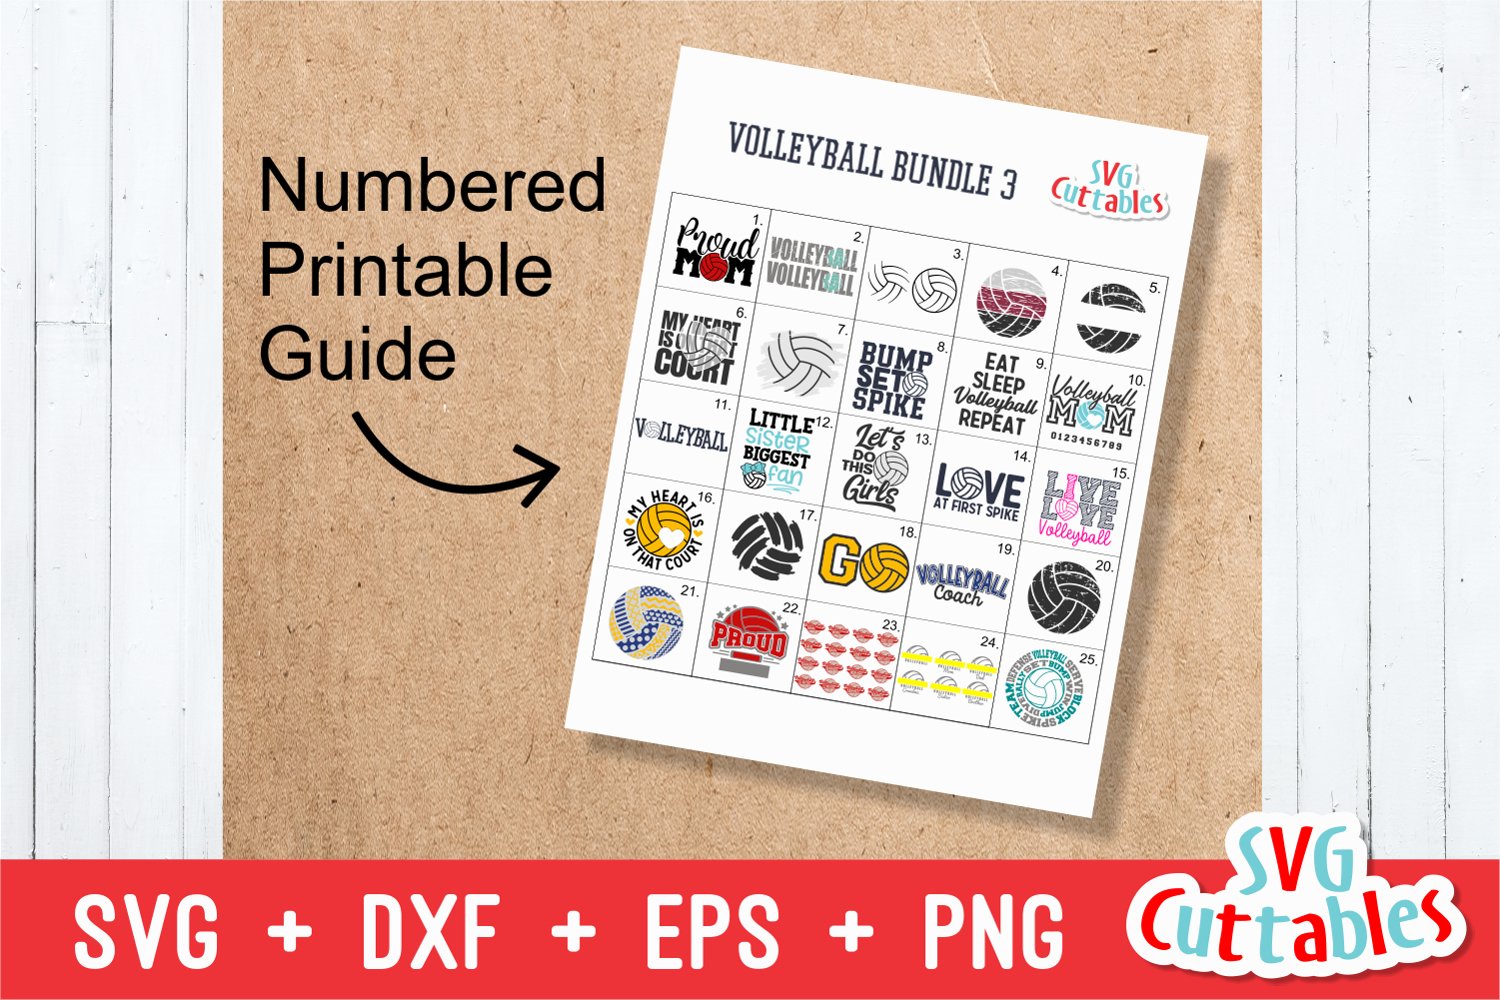 You will get a bonus with numbered printout of all designs.